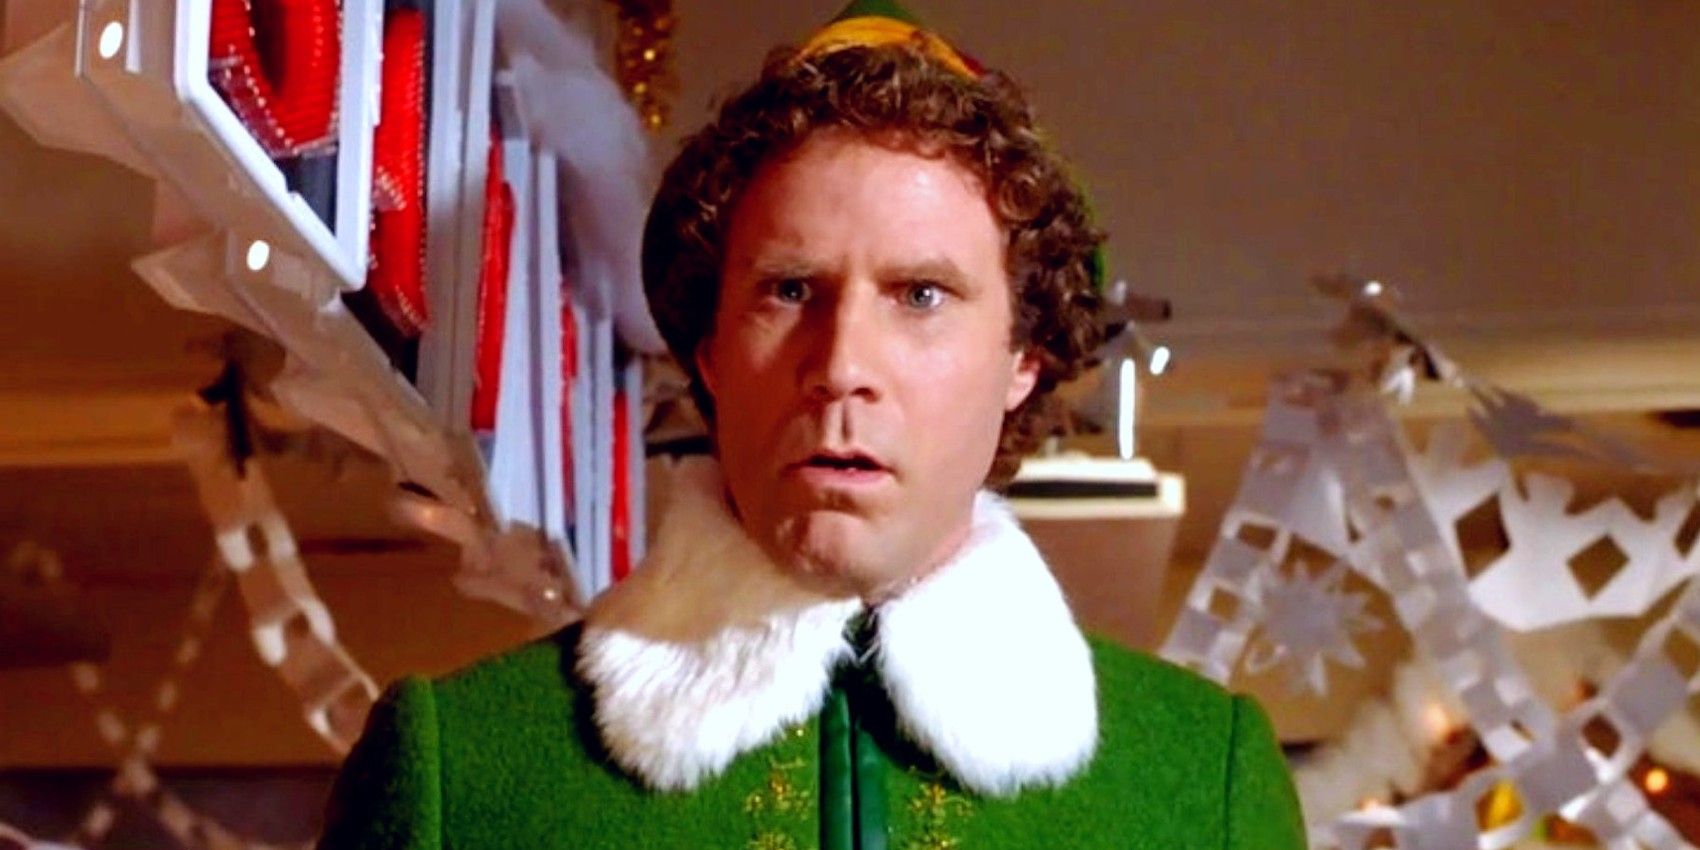 Will Ferrell as Buddy the Elf looking surprised